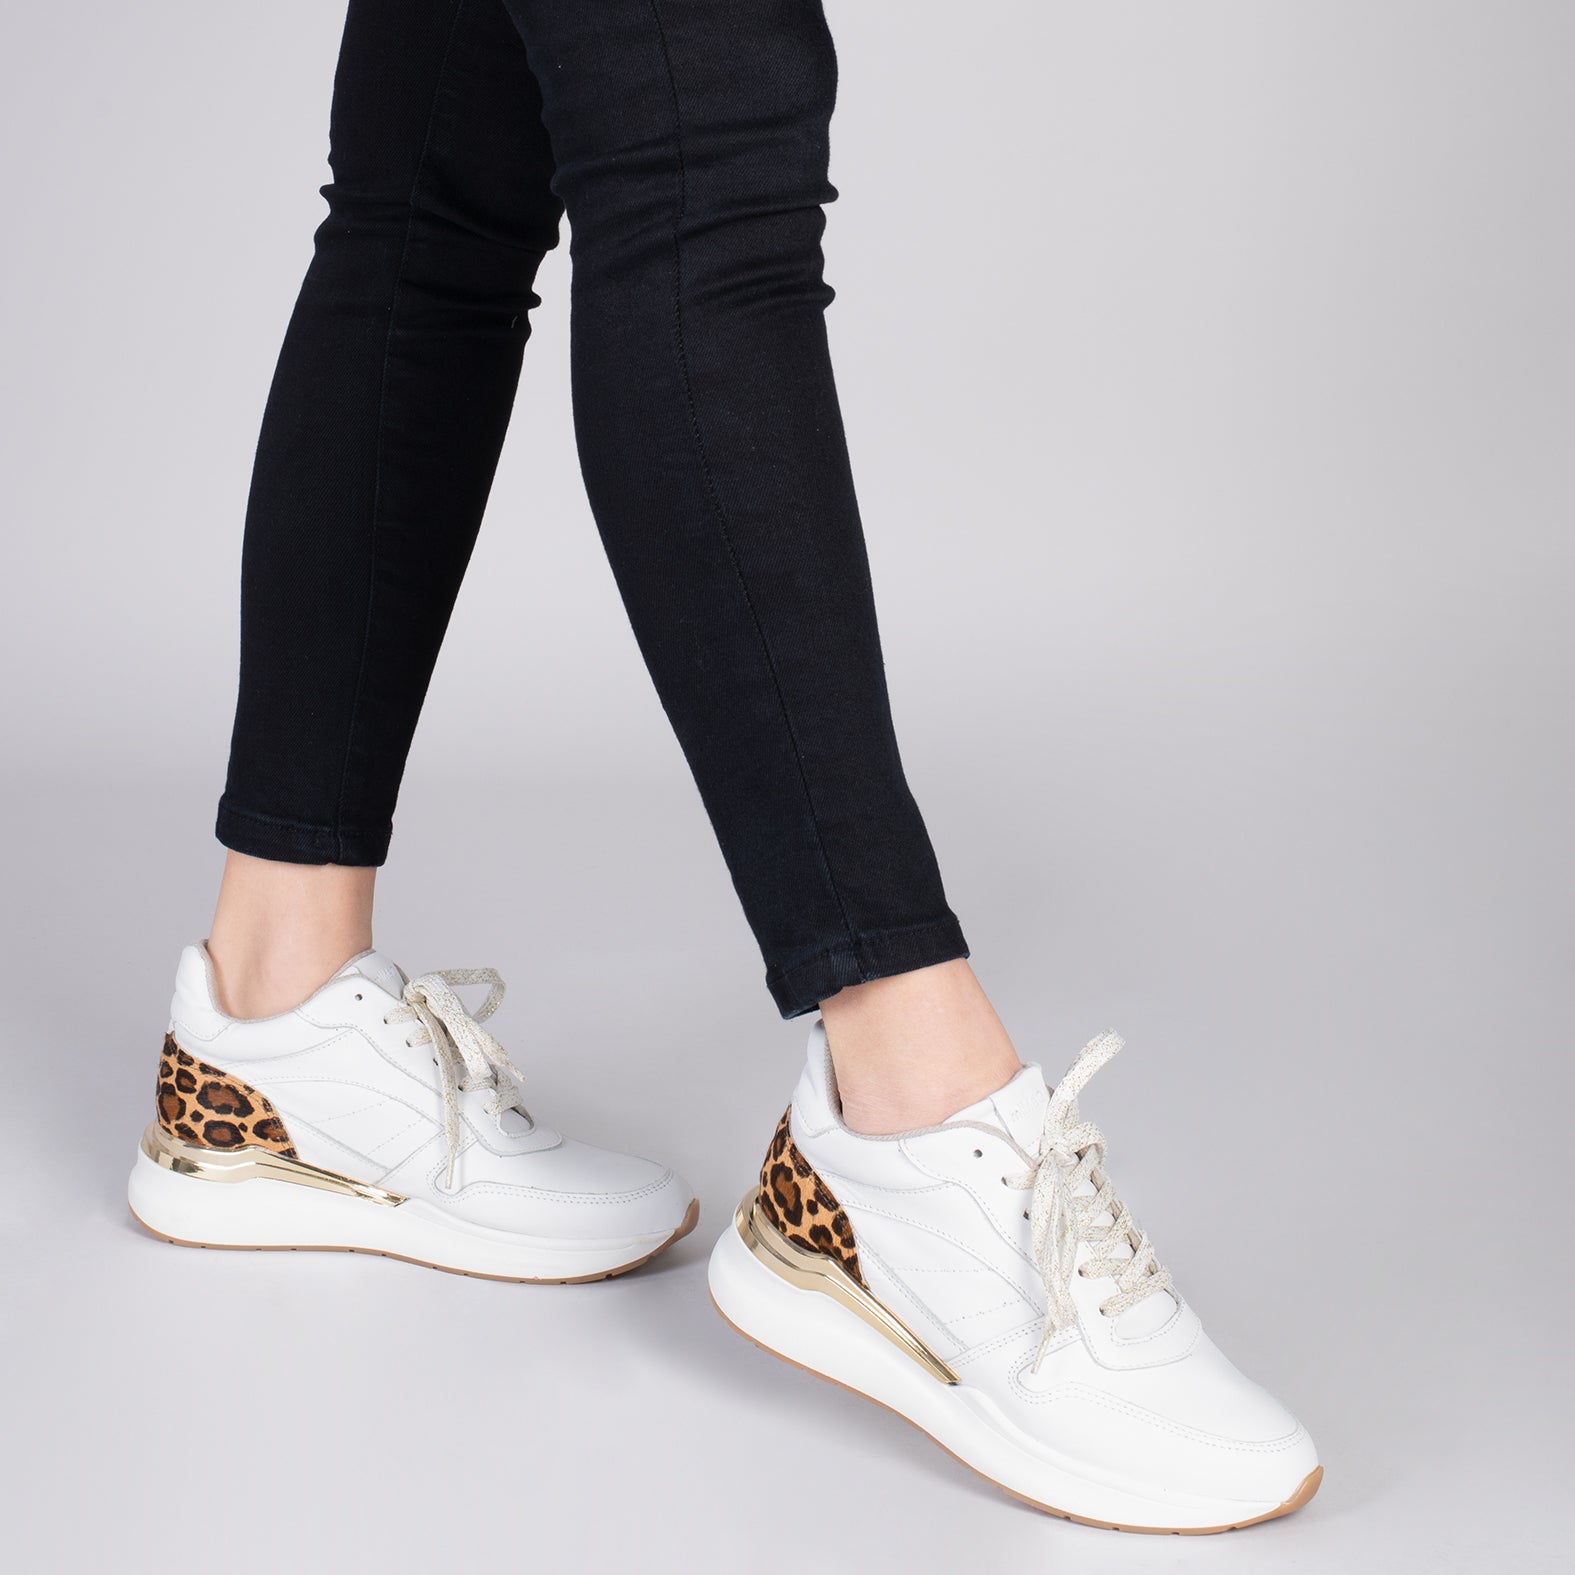 FREEDOM – WHITE & LEOPARD sneakers with removable insole